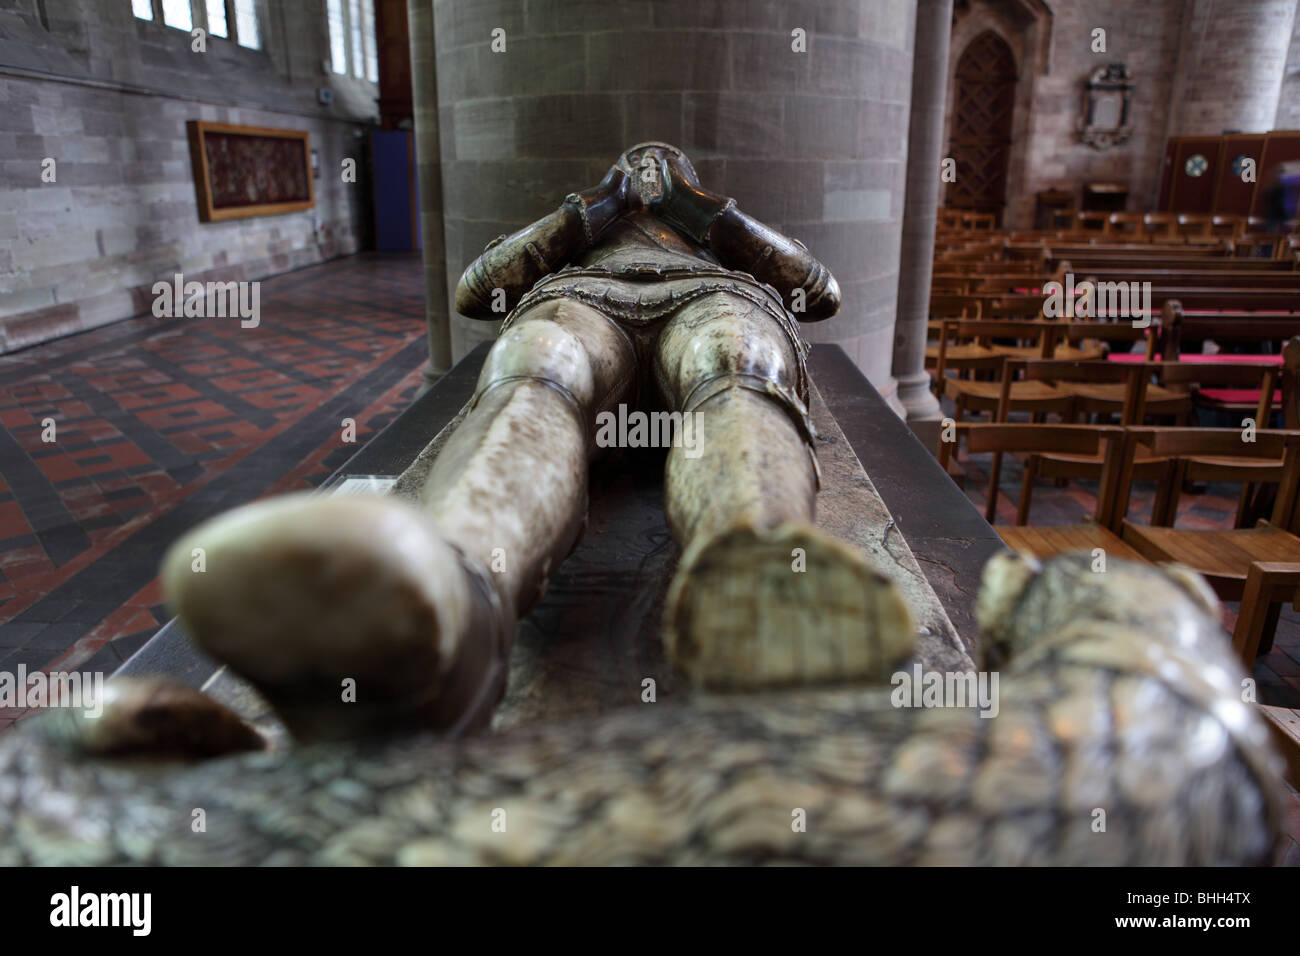 Tomb effigy of Sir Richard Pembridge Knight of the Garter under Edward III,situated between the Nave and South Aisle. Stock Photo